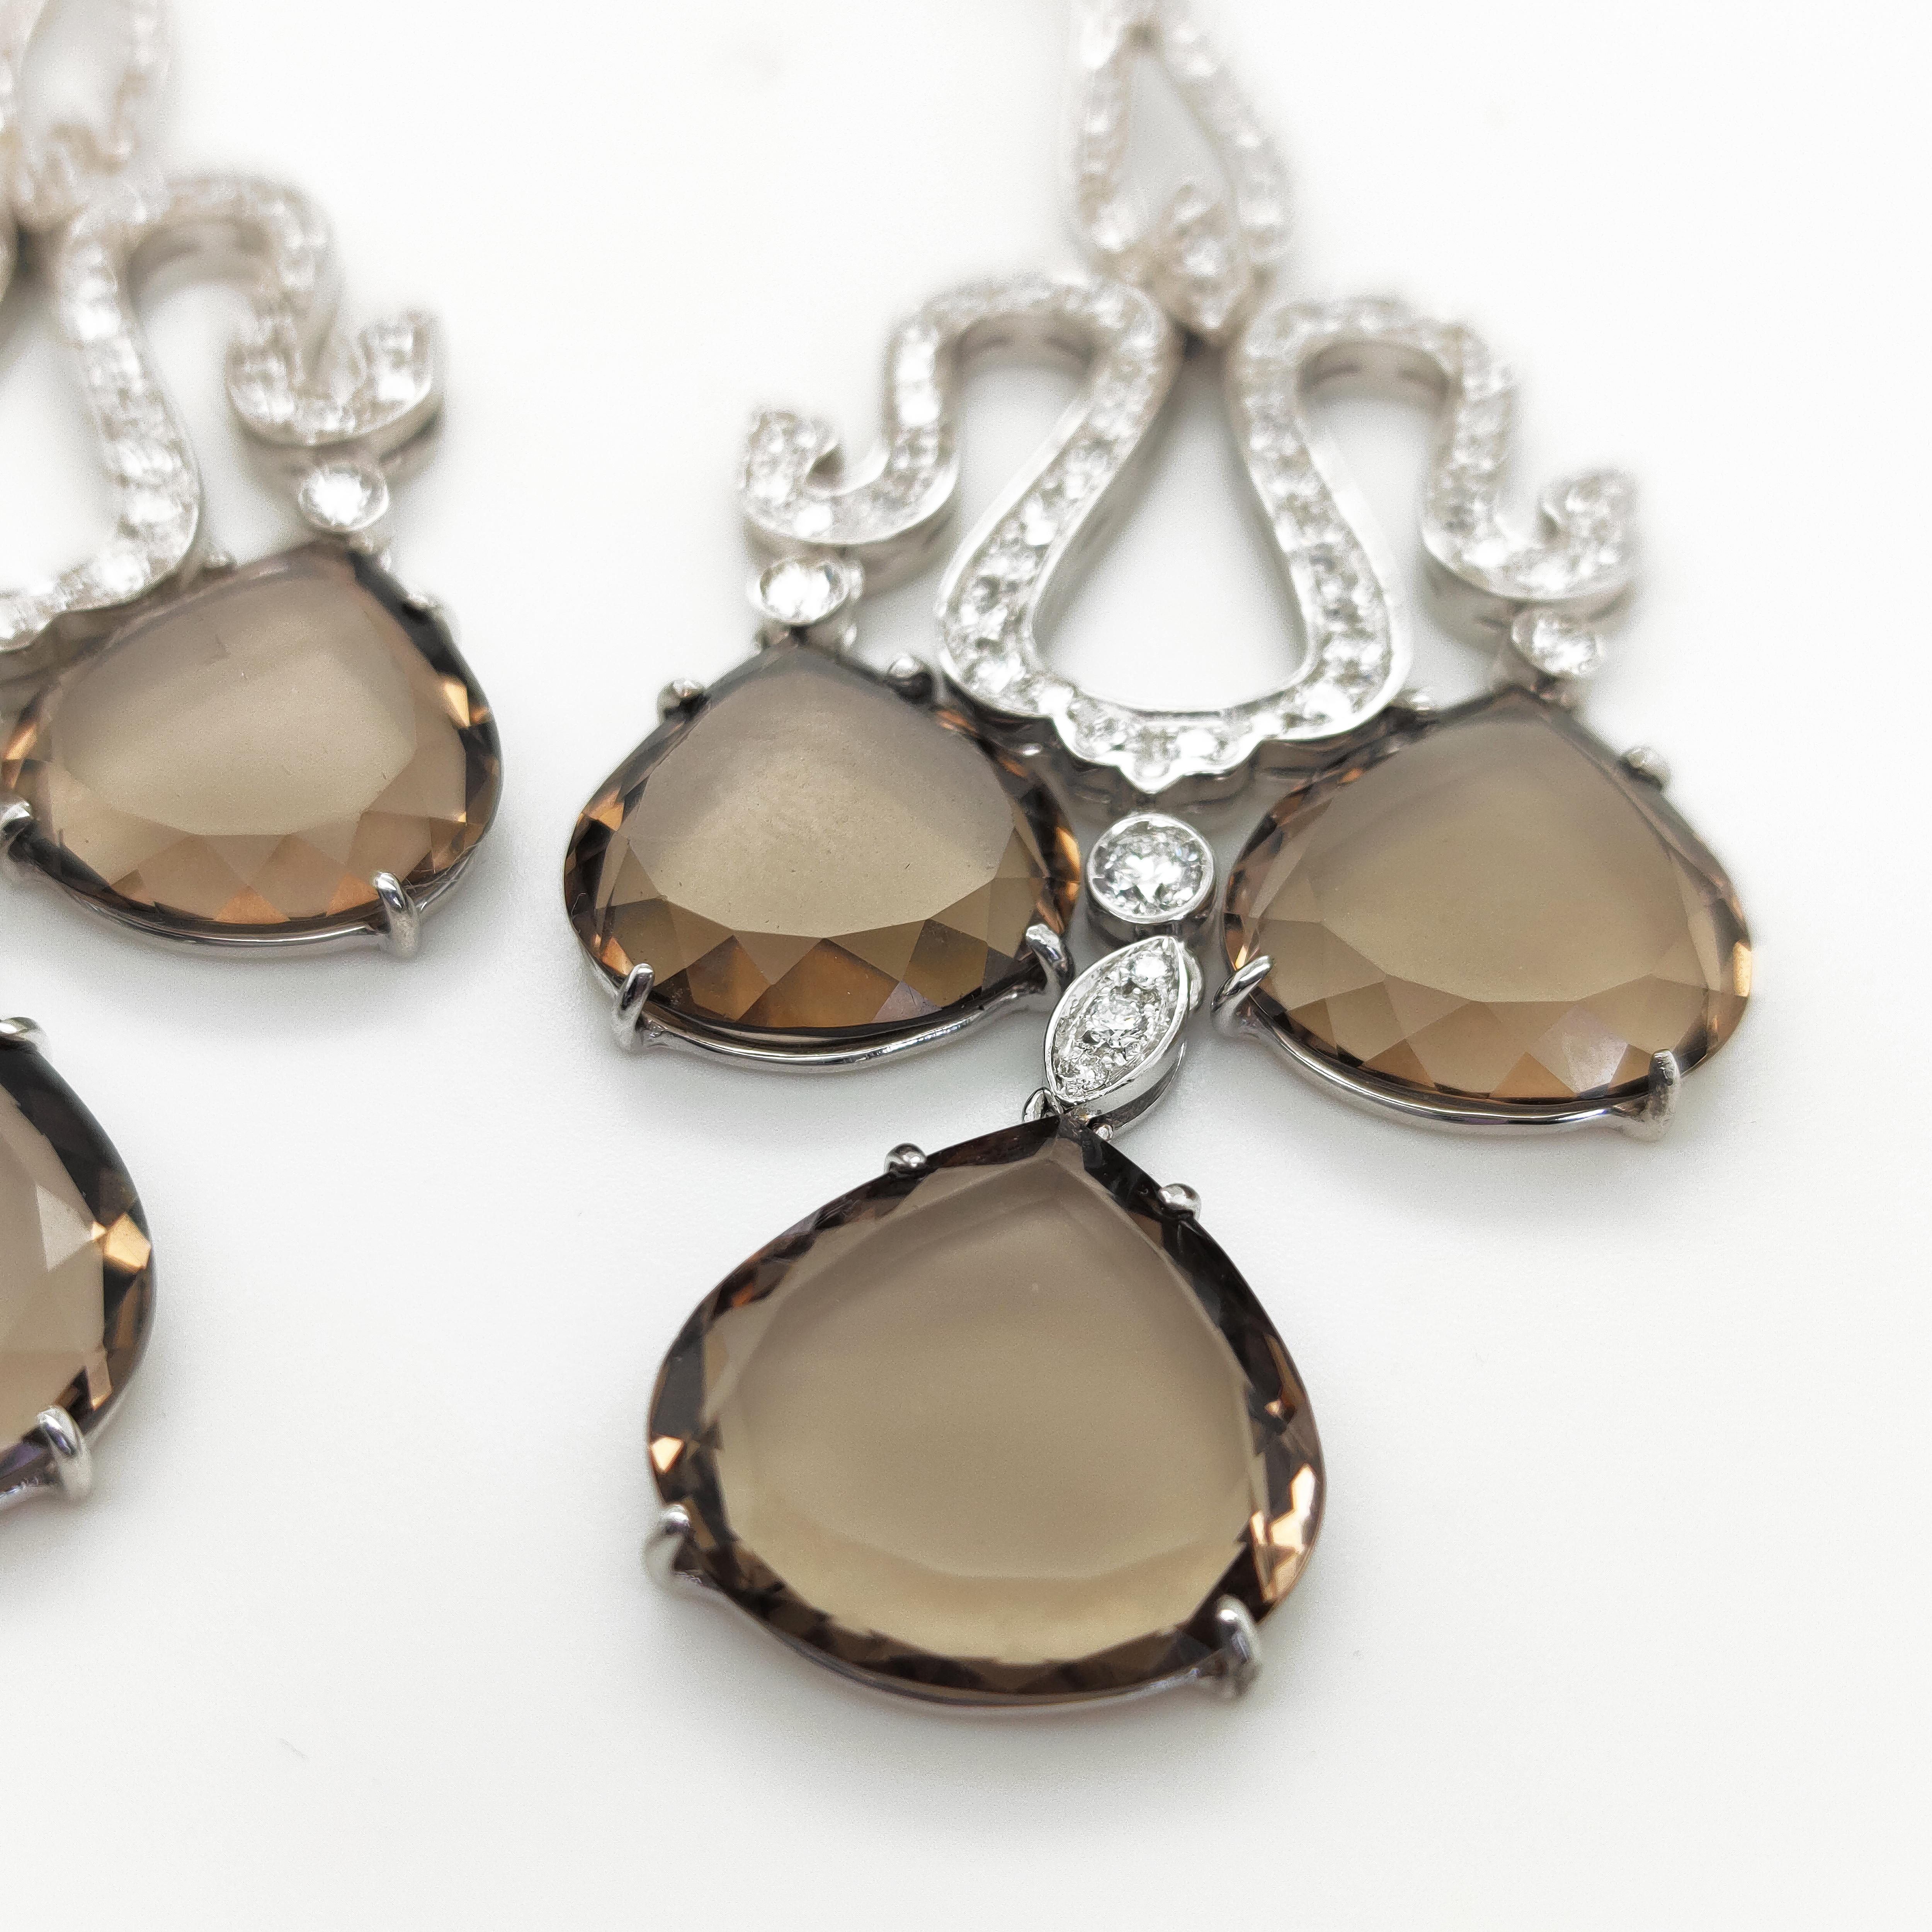 The chandelier style of these earrings creates a dramatic and impressive silhouette. They are sure to make a statement and add a touch of glamour to any outfit. The combination of smoky quartz and diamonds in white gold creates a stunning contrast